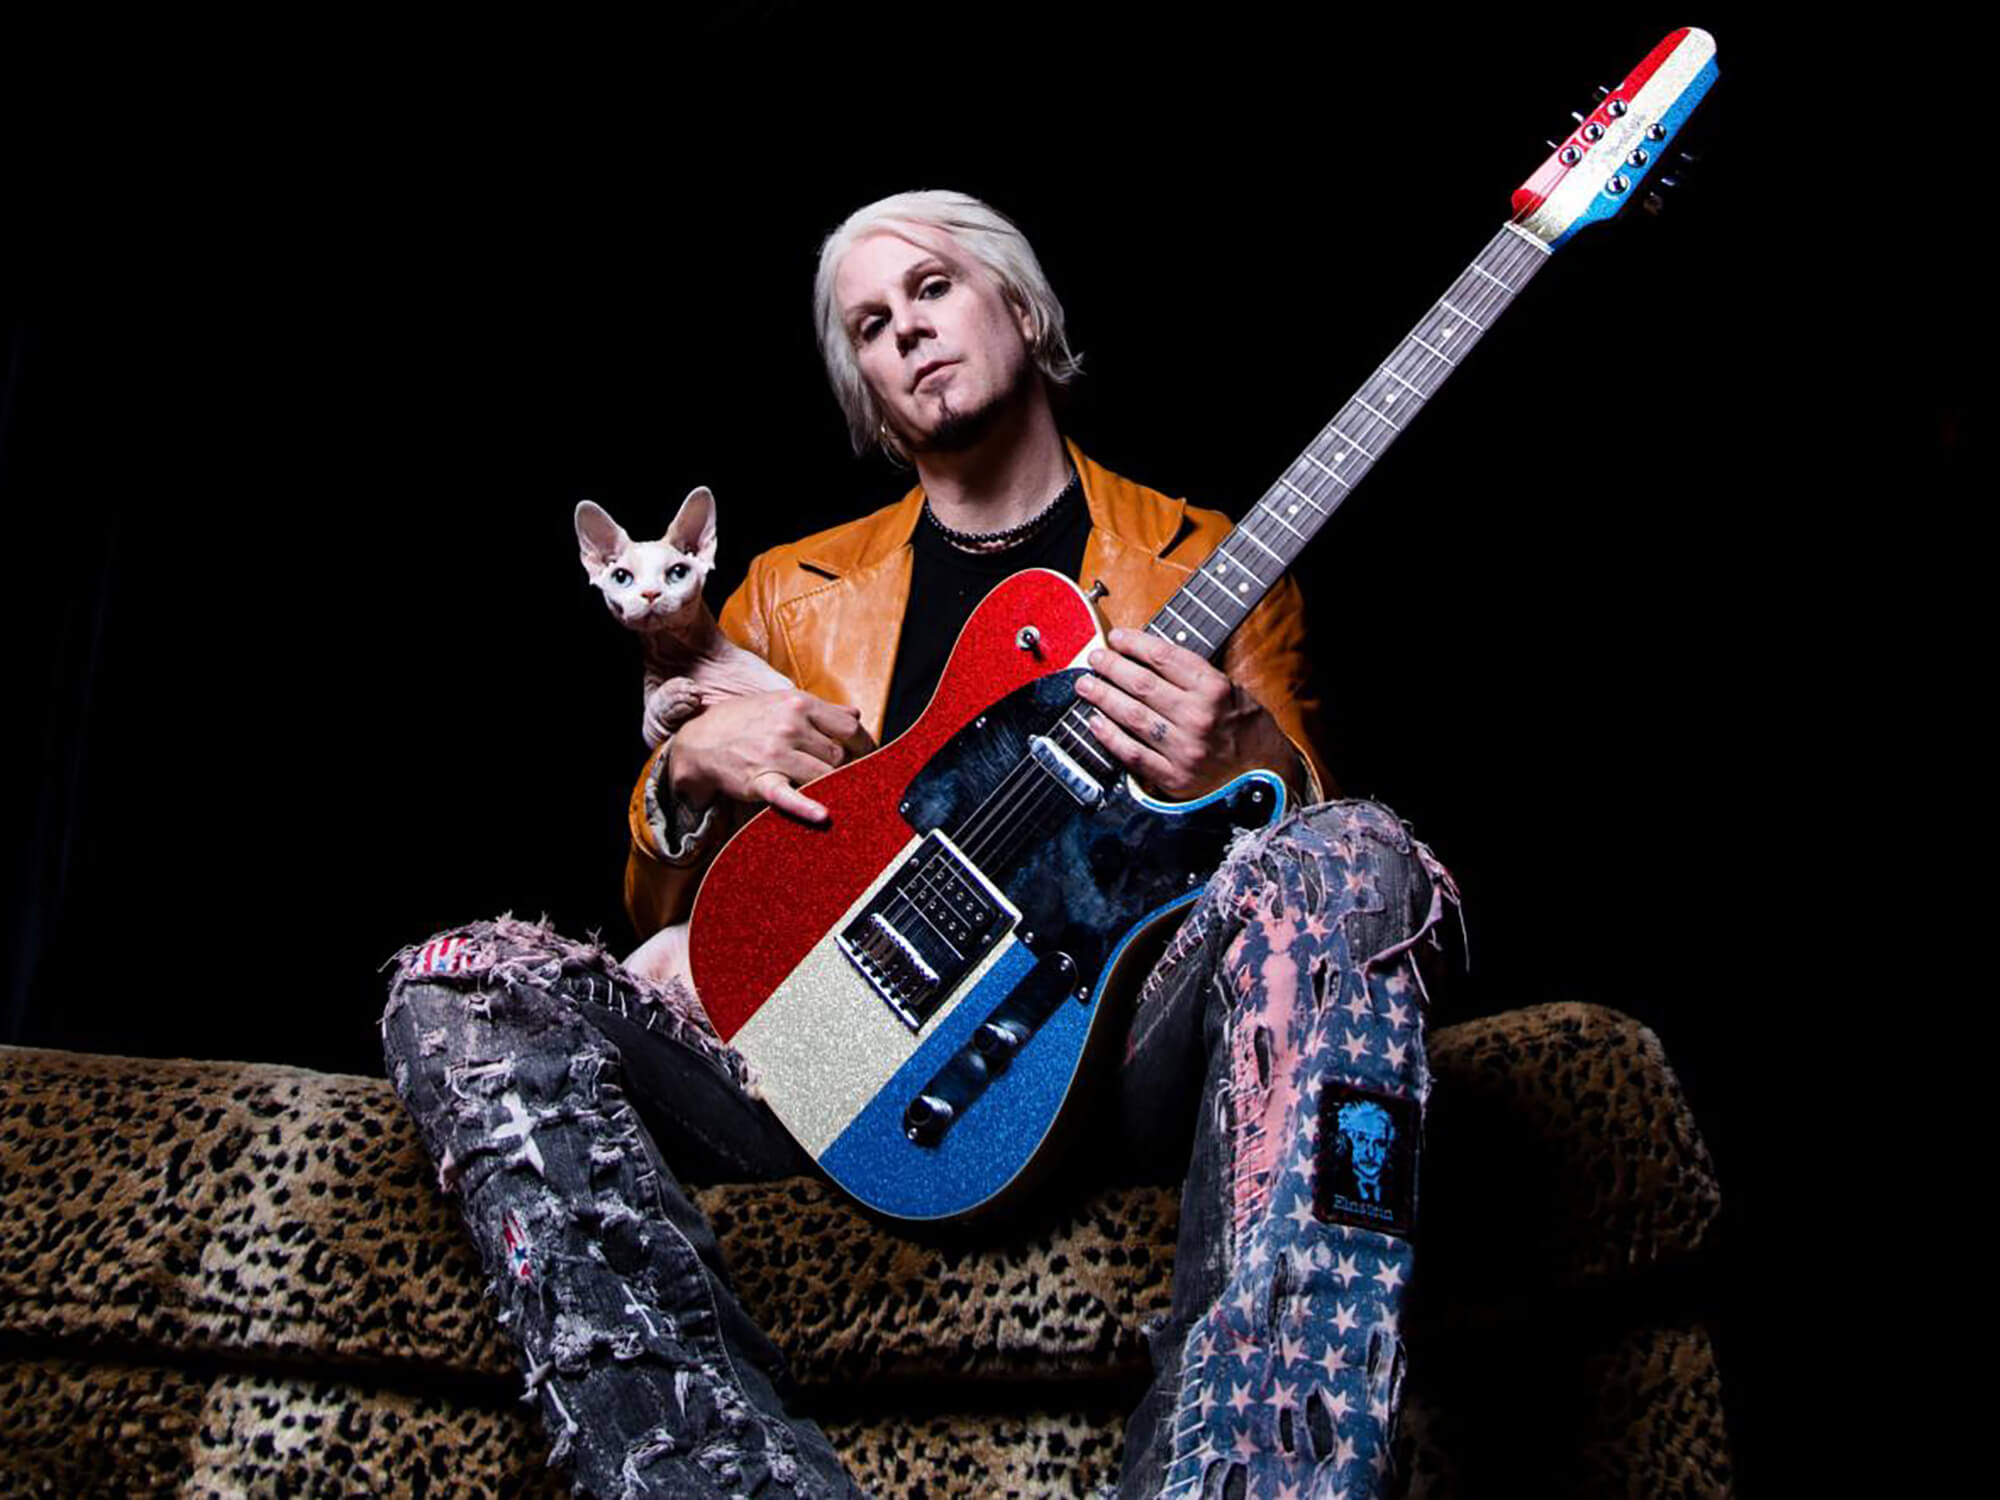 I just wanted to be a working musician. I never dreamt of any of this!” John  5 on covering Queen, loving Les Paul and surpassing his wildest dreams